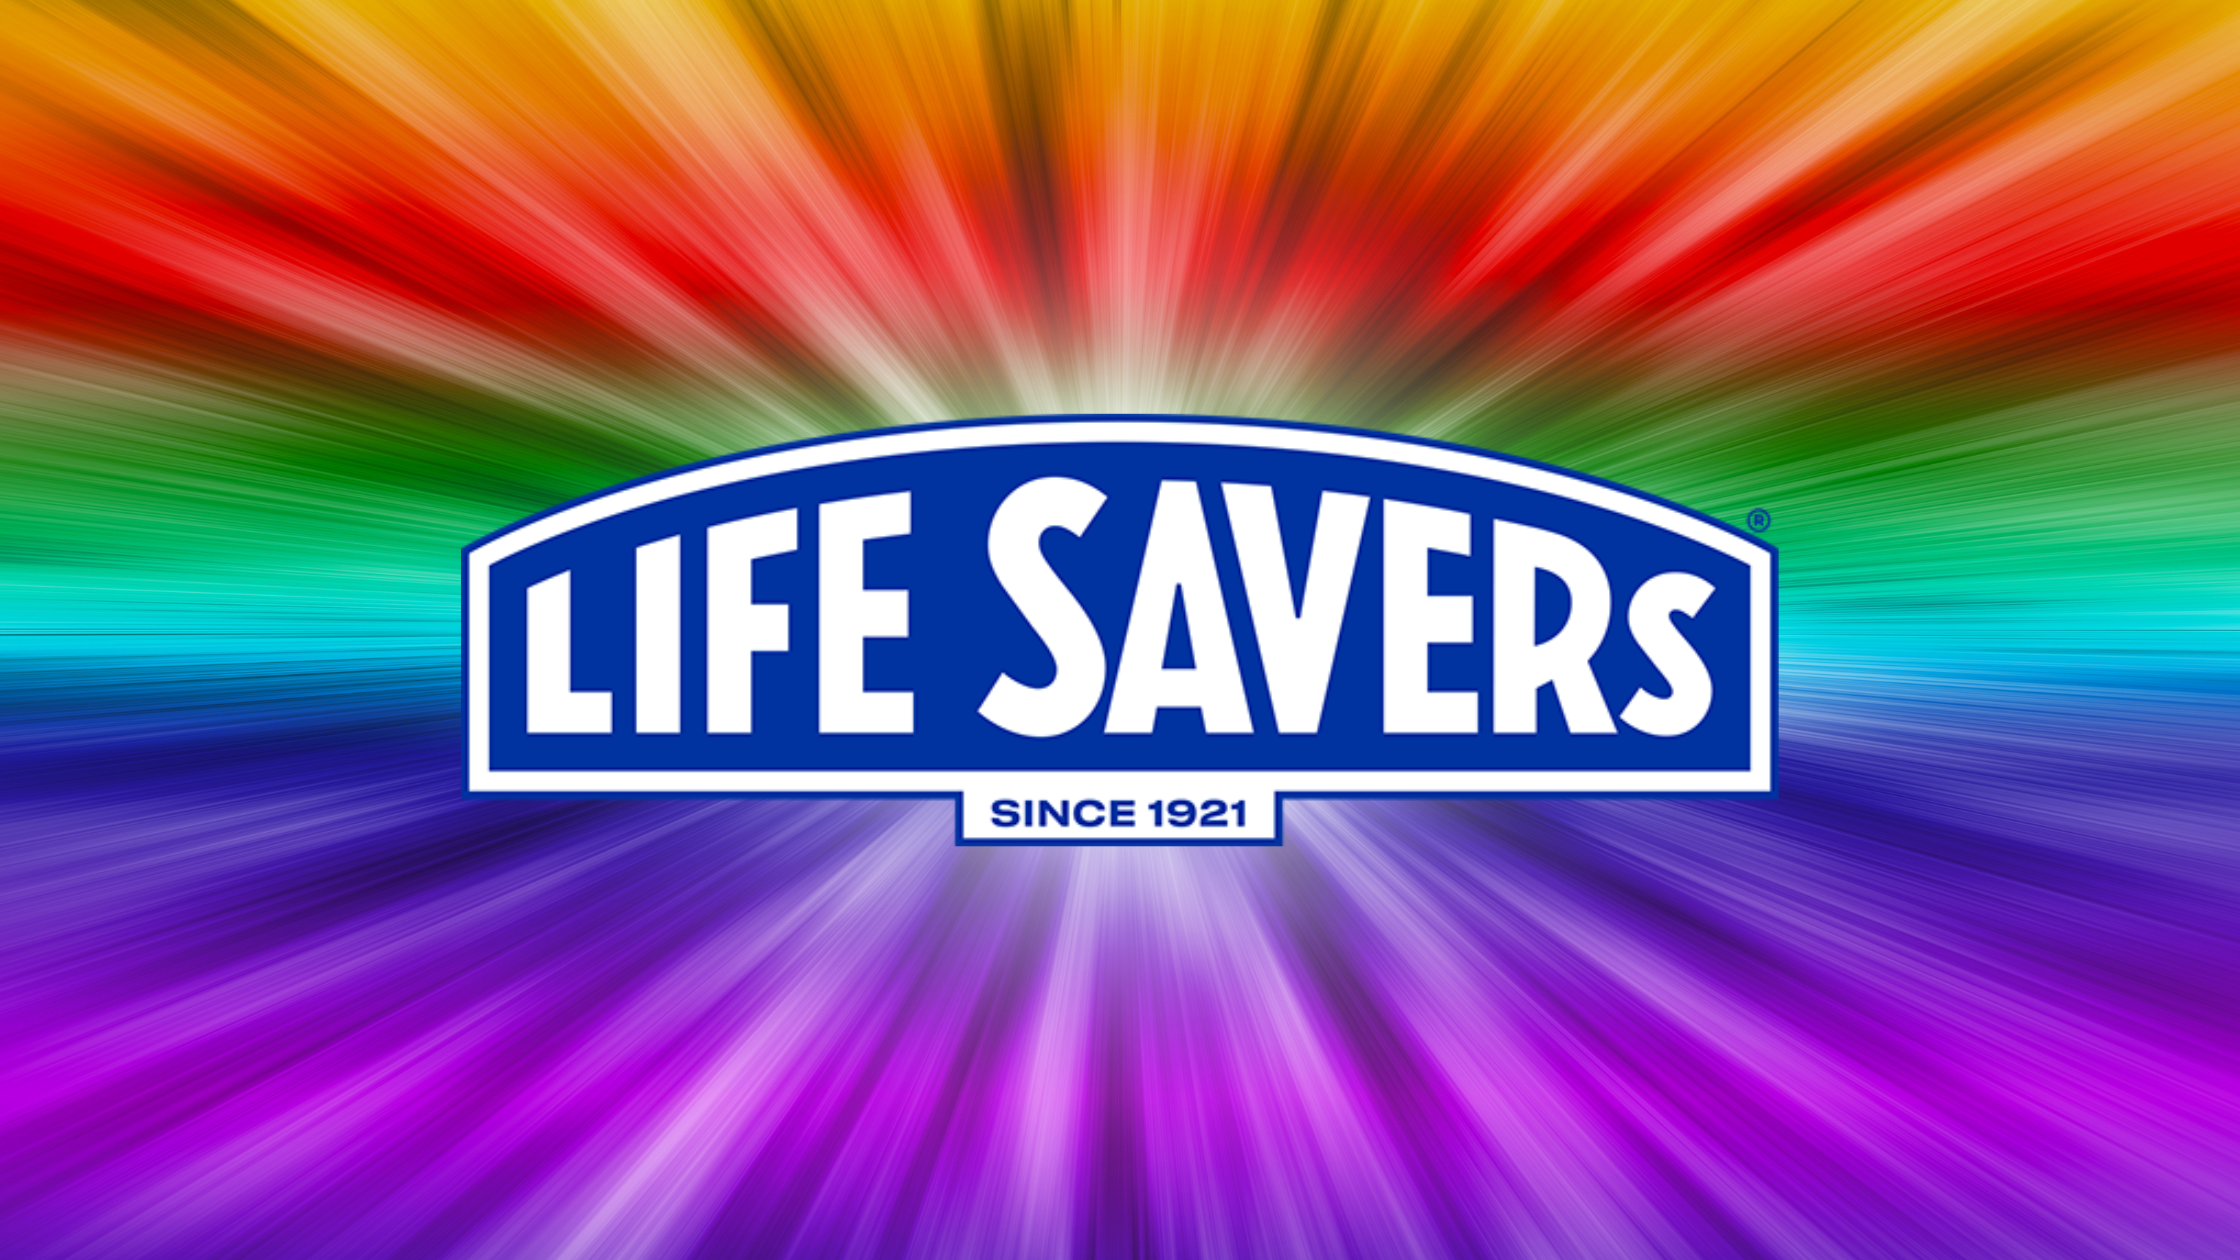 The Most Accurate Life Savers Candy Guide Ever Published